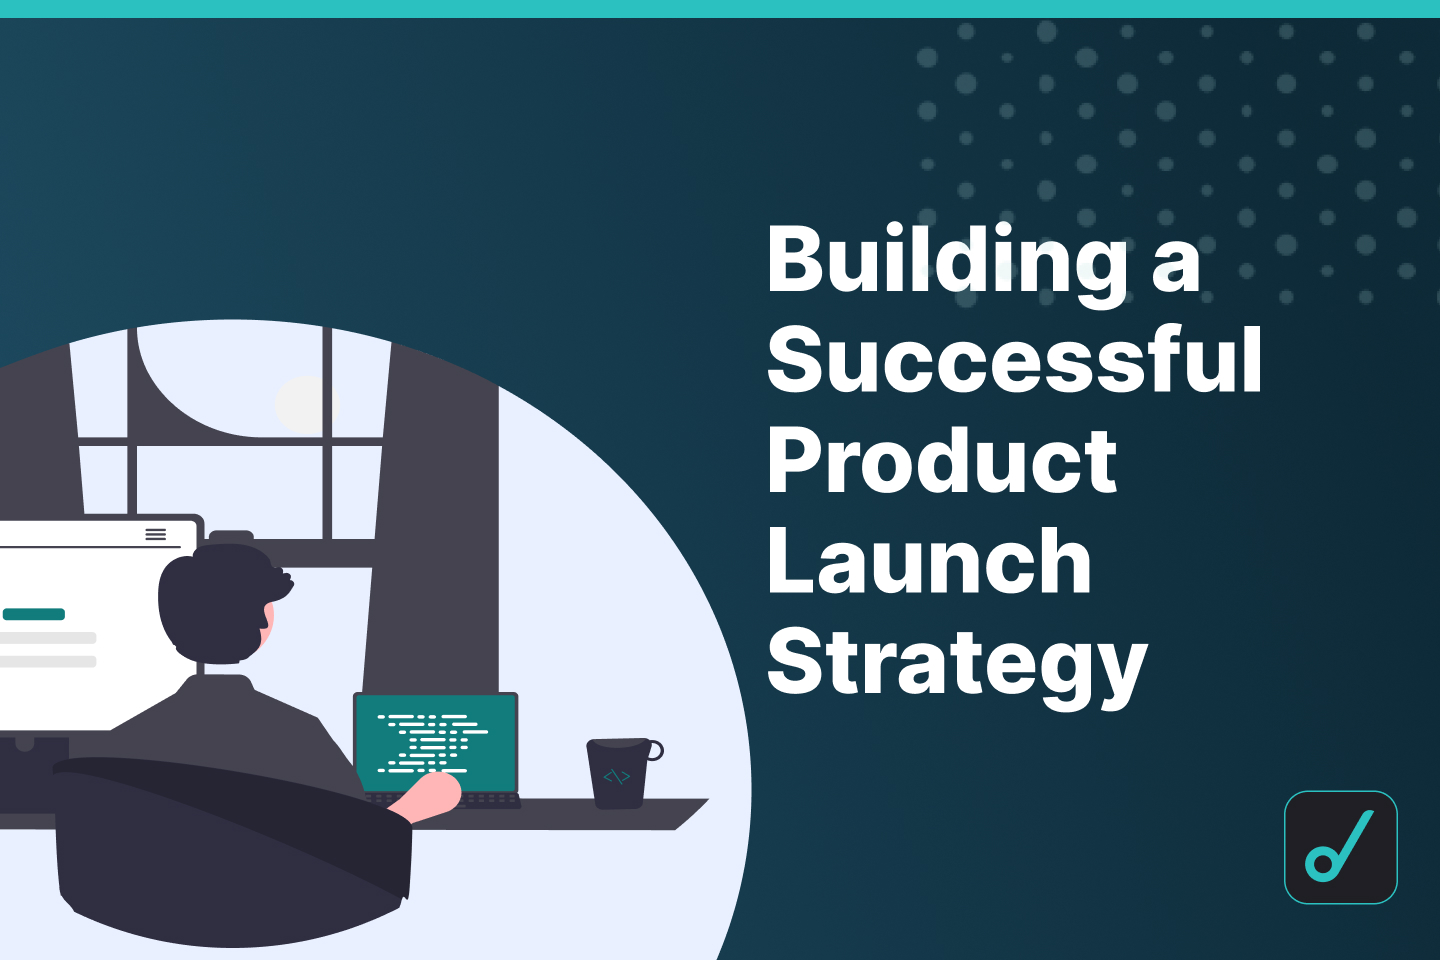 How to Build a Successful Product Launch Strategy